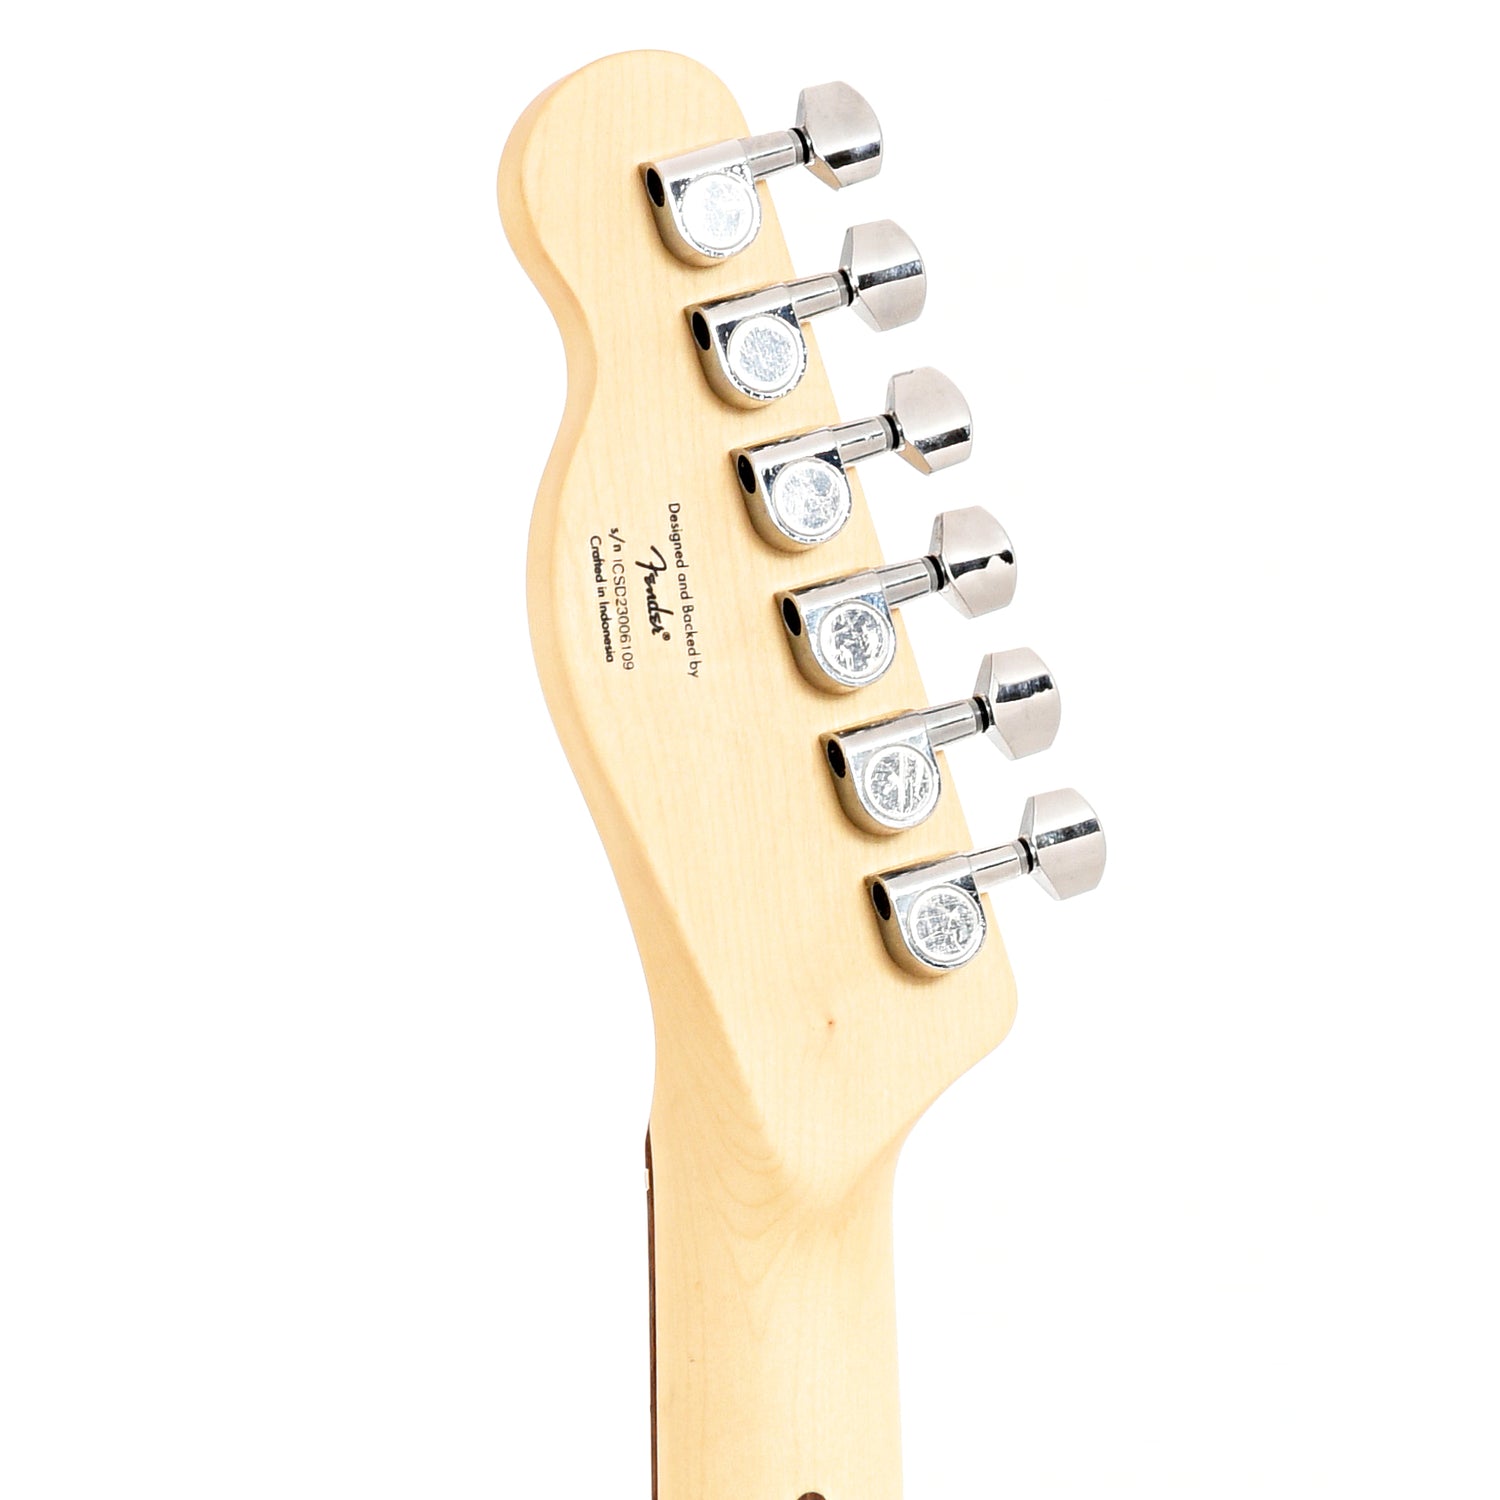 Back headstock of Squier Sonic Esquire H, Ultraviolet